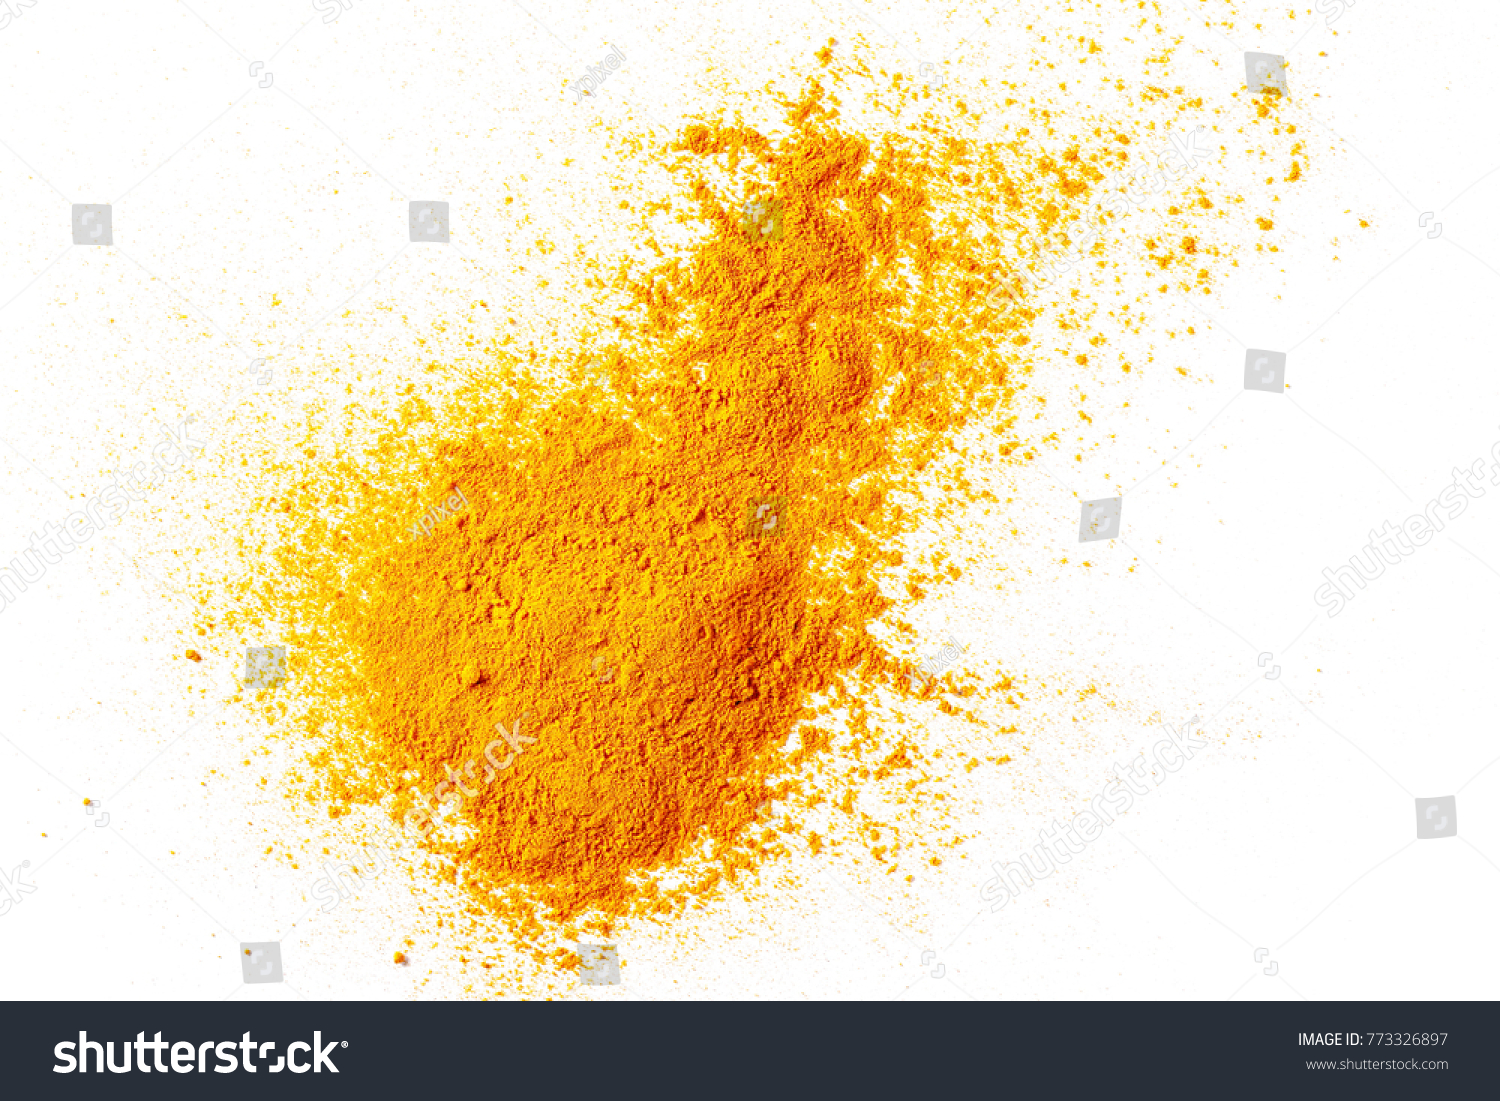 Turmeric (Curcuma) powder pile isolated on white background, top view #773326897